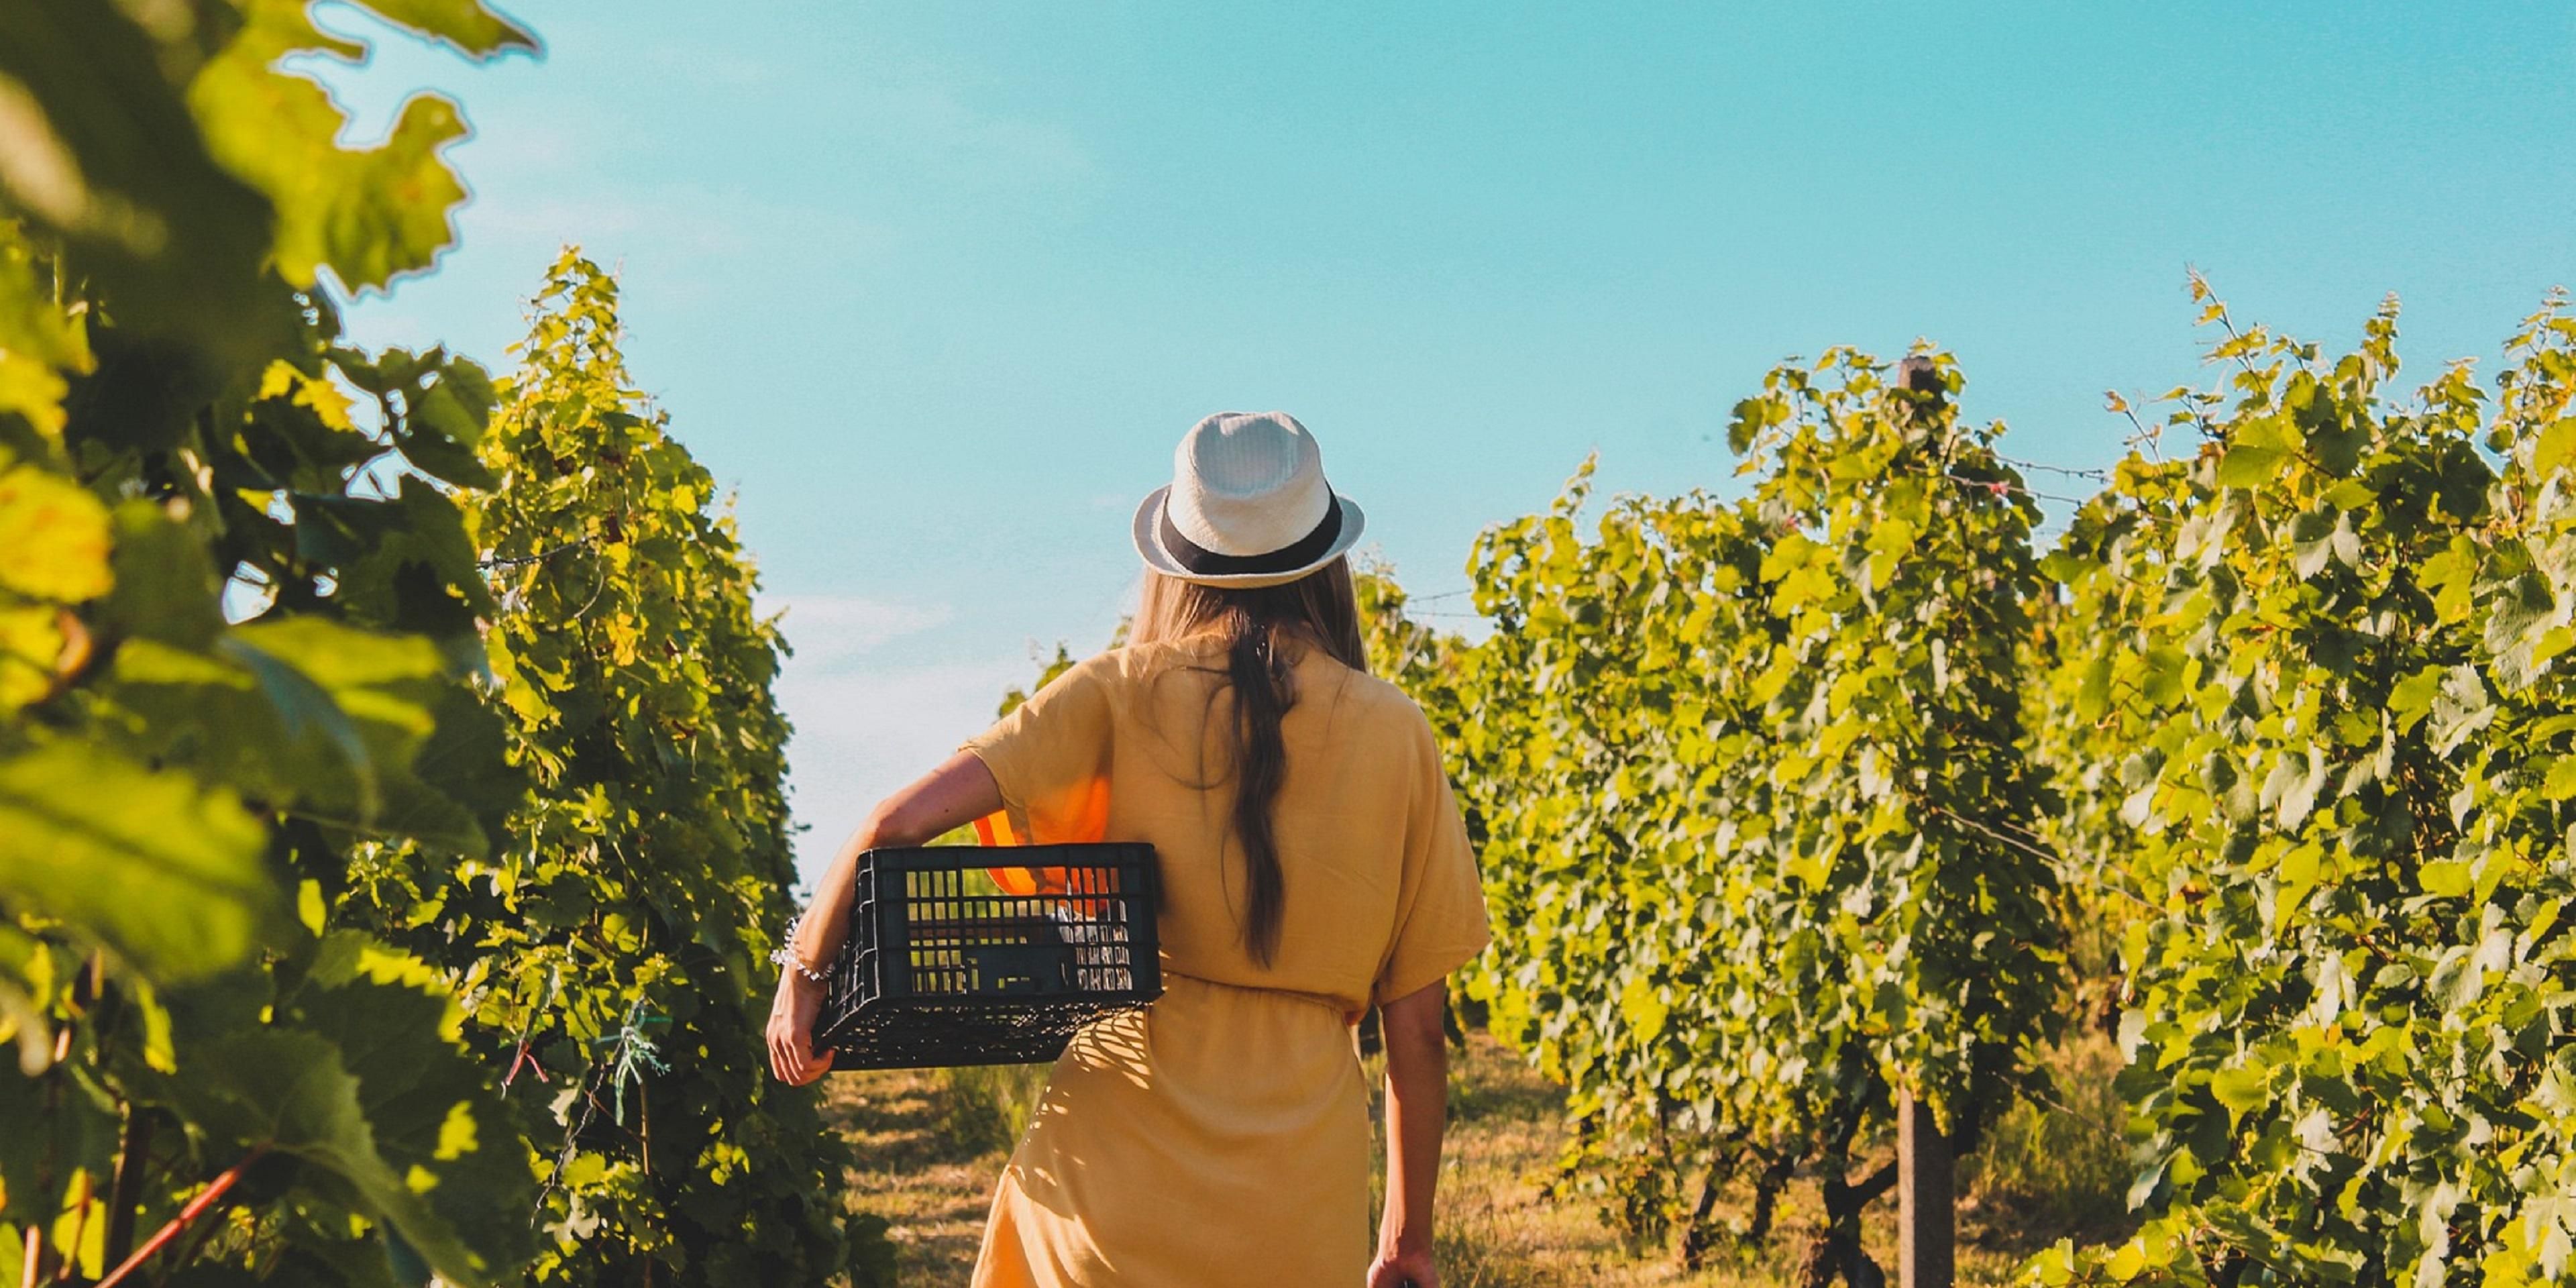 Escape to local wineries after your relaxing stay. We have many favorites to choose from within a few of miles away from our hotel. Be sure to ask the receptionist for a map to nearby wineries.